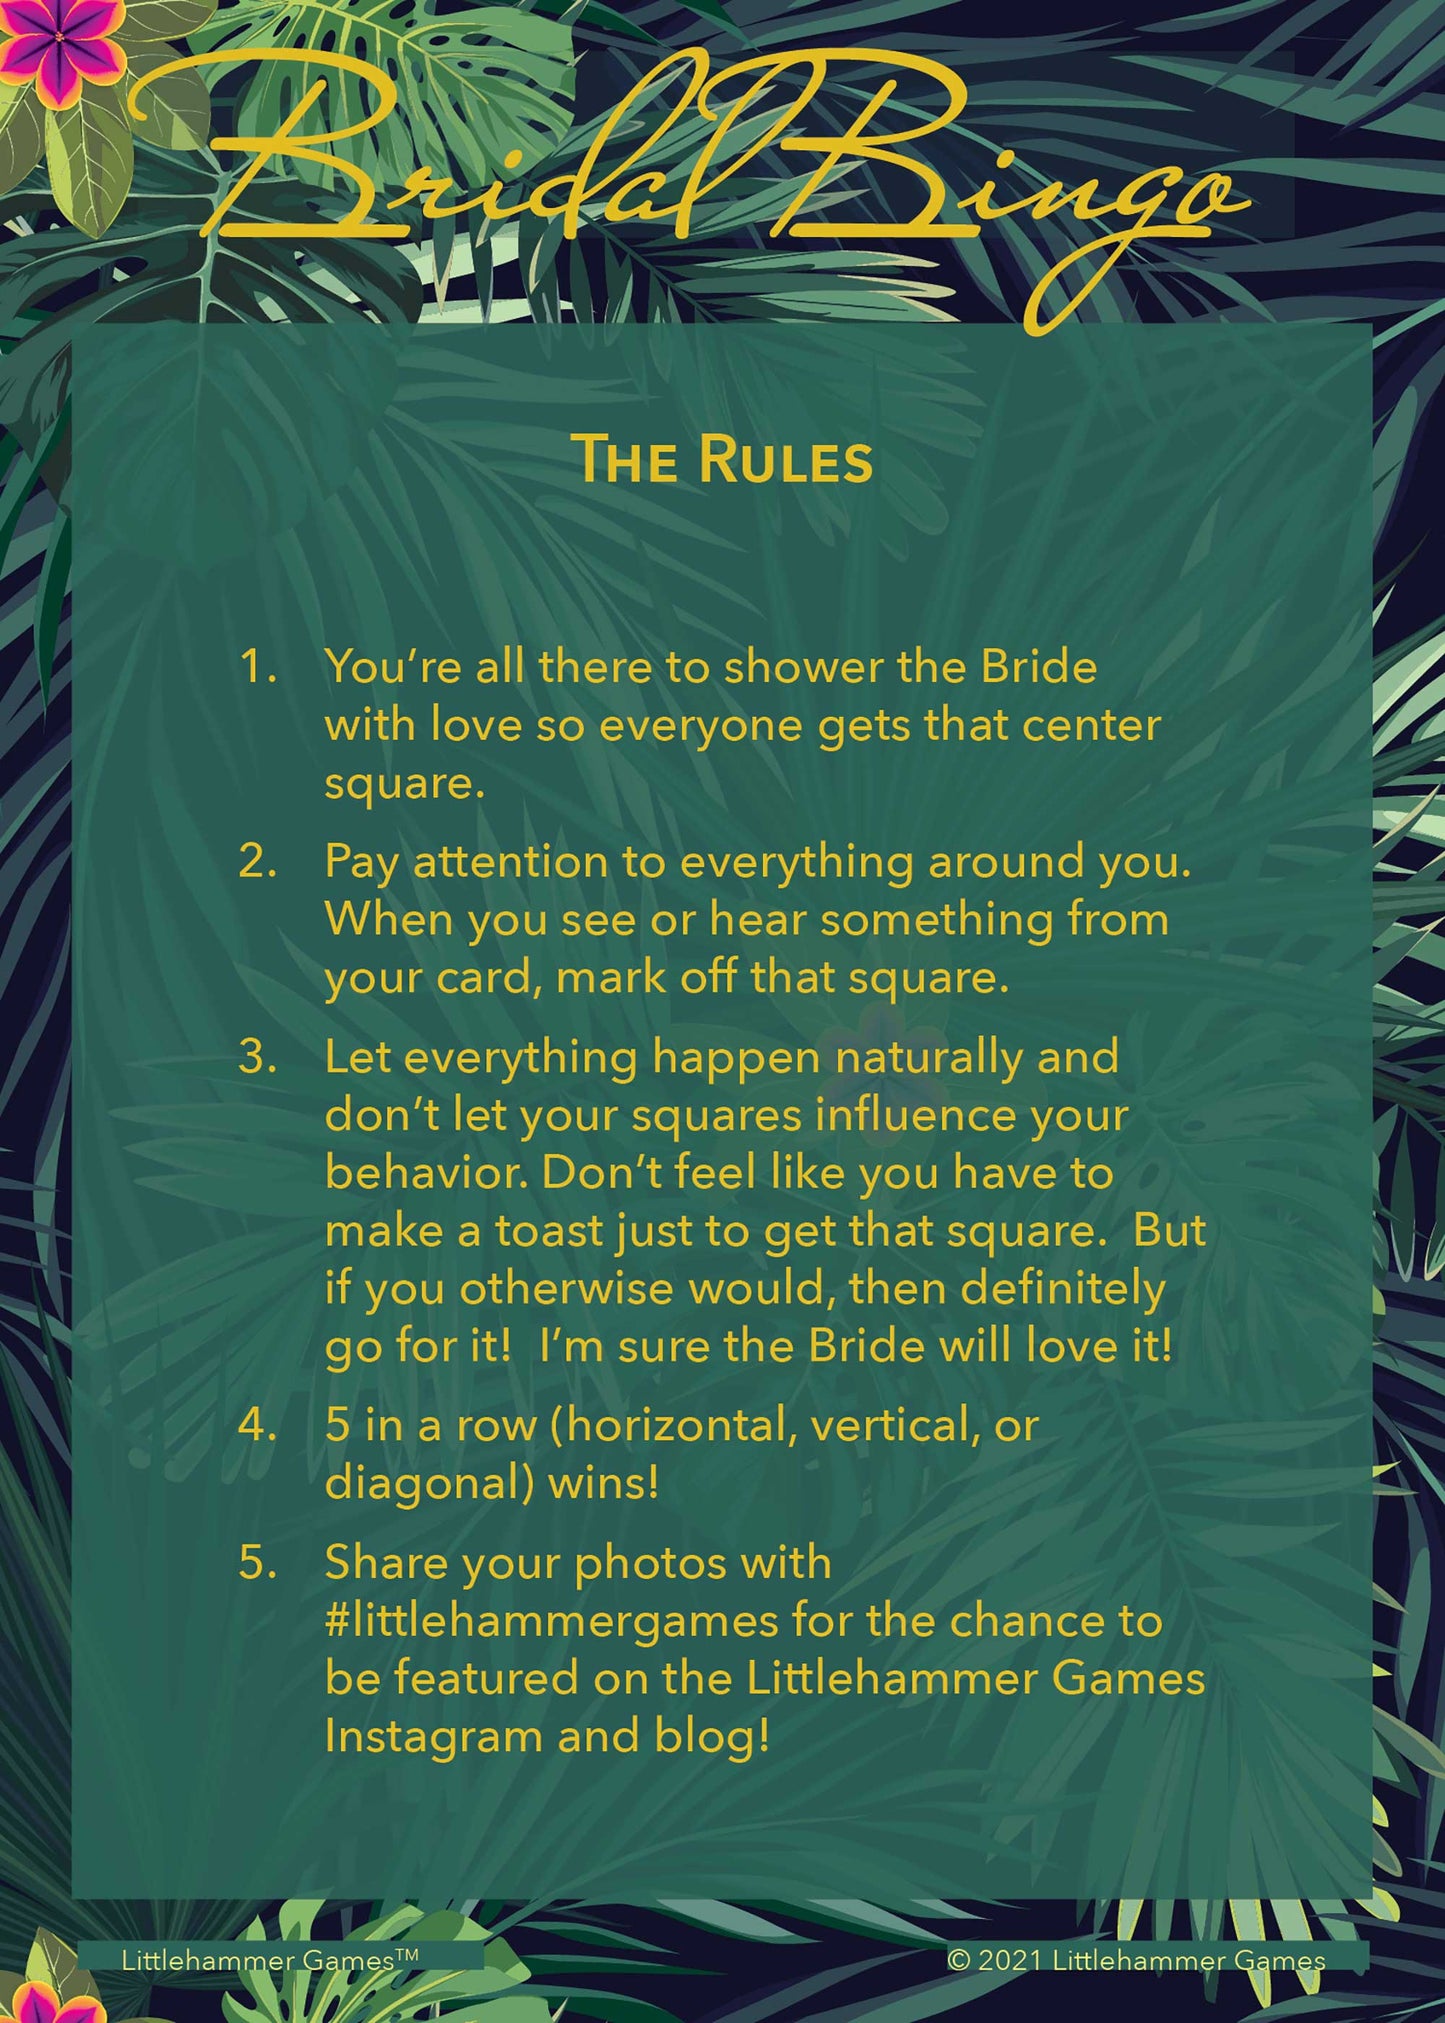 Bridal Bingo rules card with gold text on a tropical background